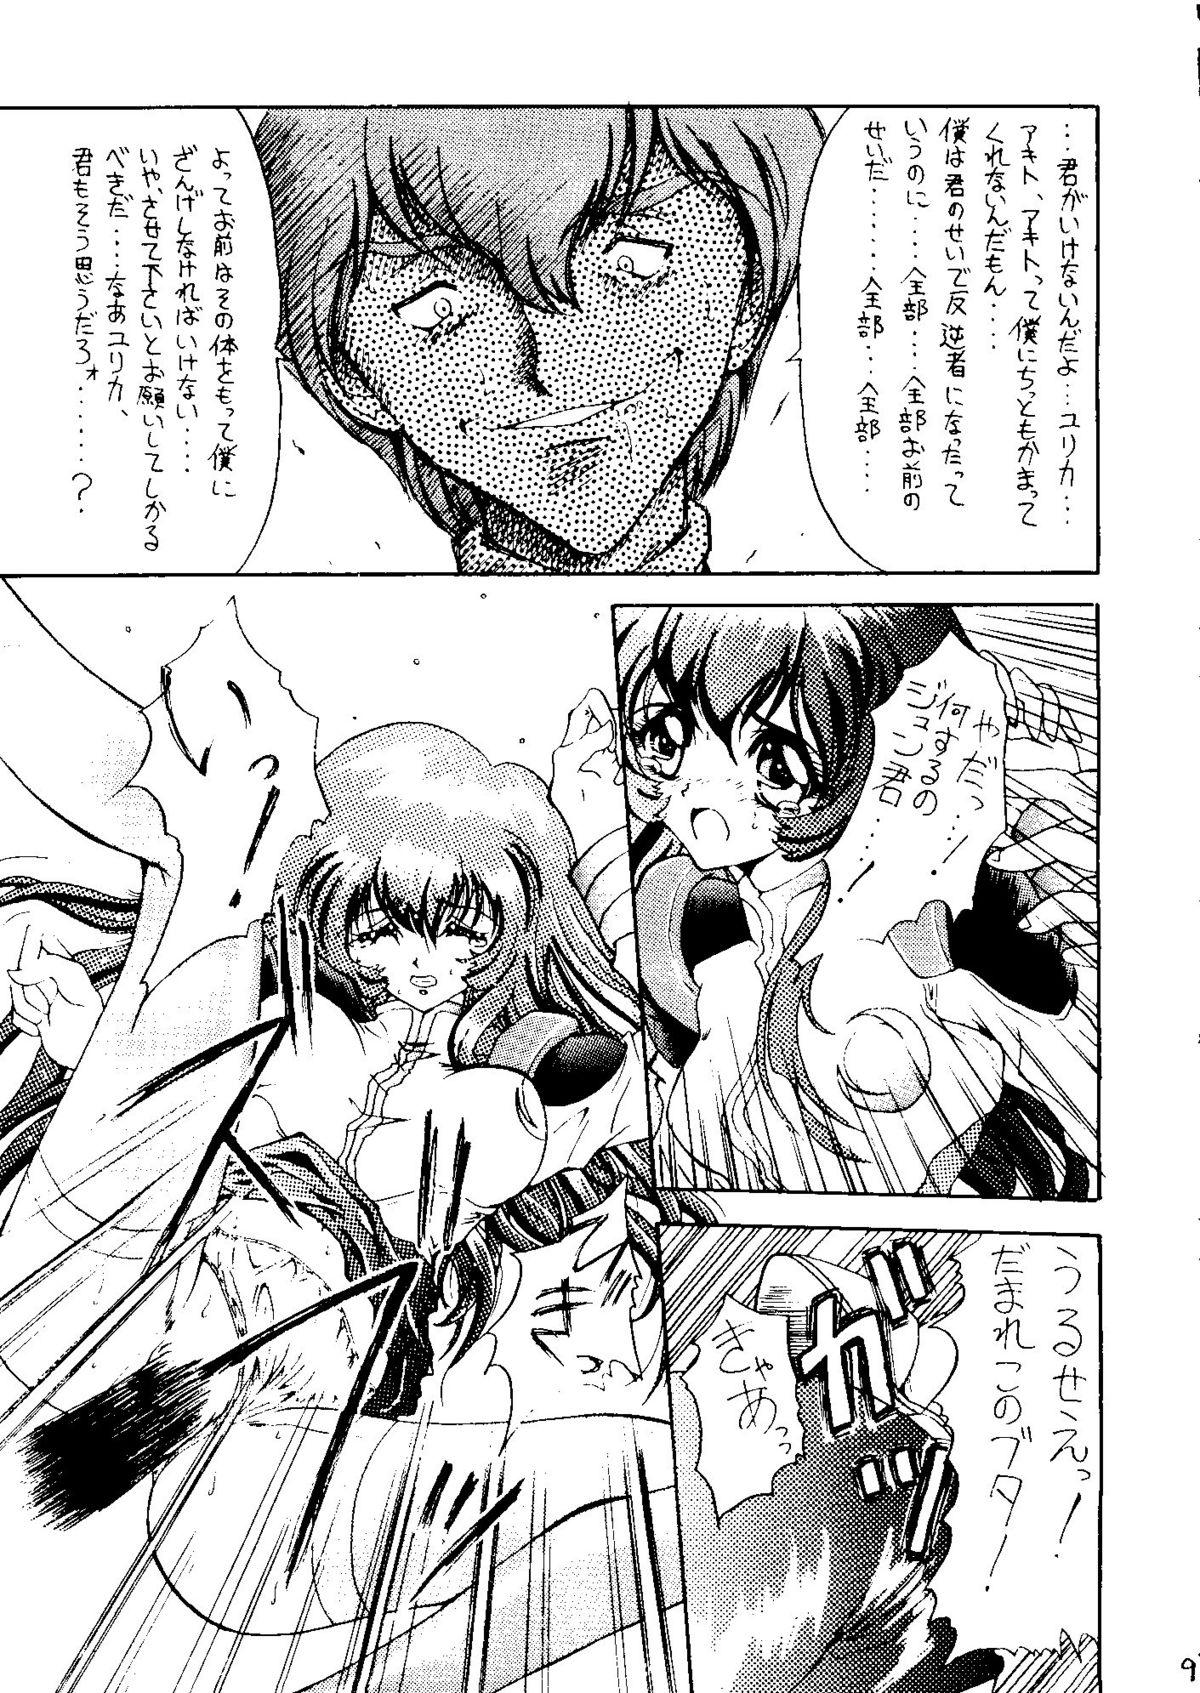 Hentai AREX Special Version - Neon genesis evangelion Martian successor nadesico World masterpiece theater Remi nobodys girl Clothed - Page 8